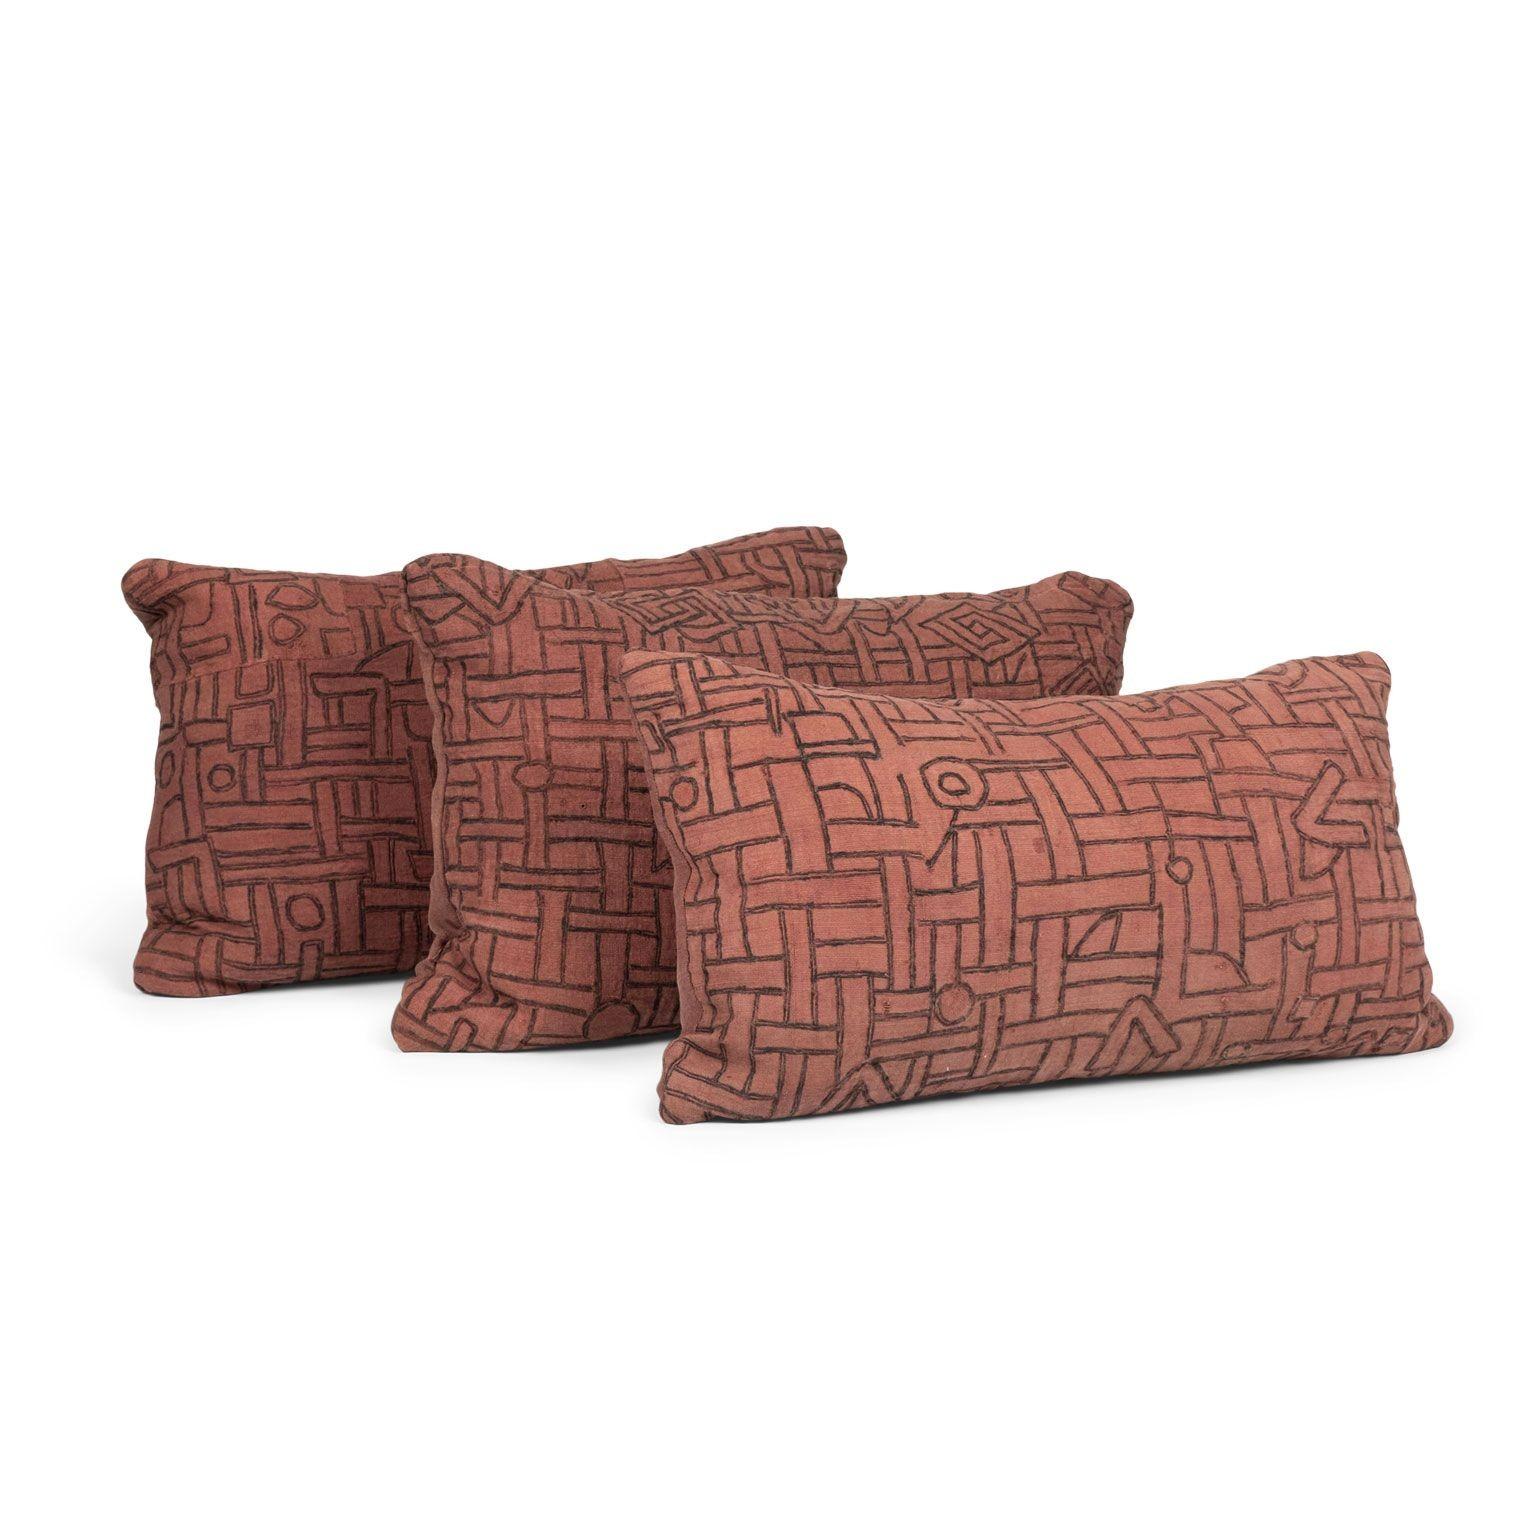 Hand-Woven Faded Plum-Color Embroidered Lumbar Cushion For Sale